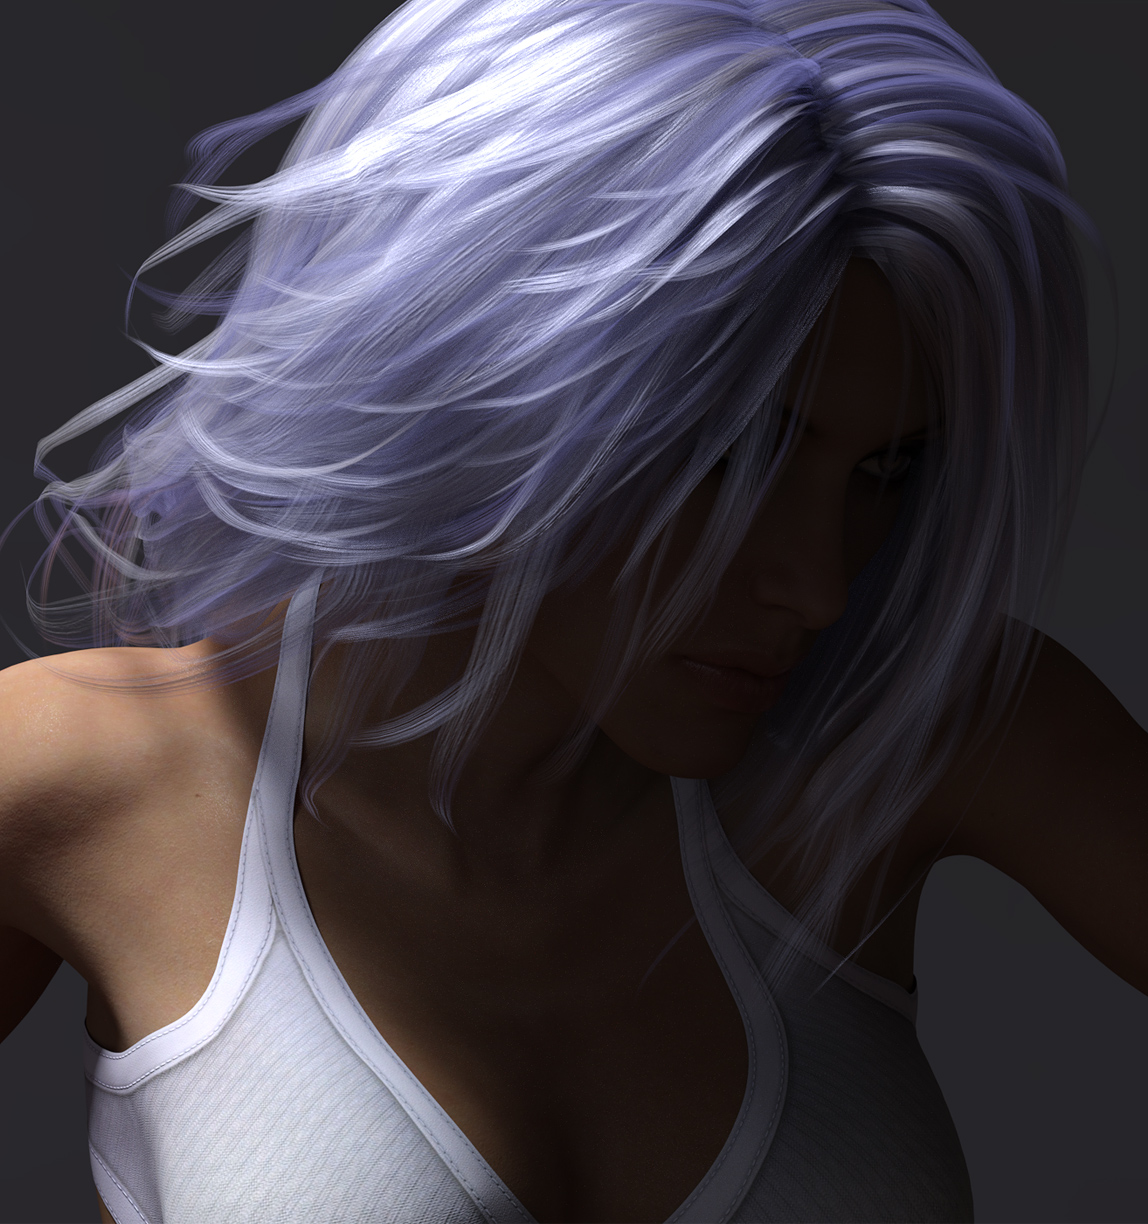 Colour Therapy: Shanda by: RuntimeDNASyydTraveler, 3D Models by Daz 3D